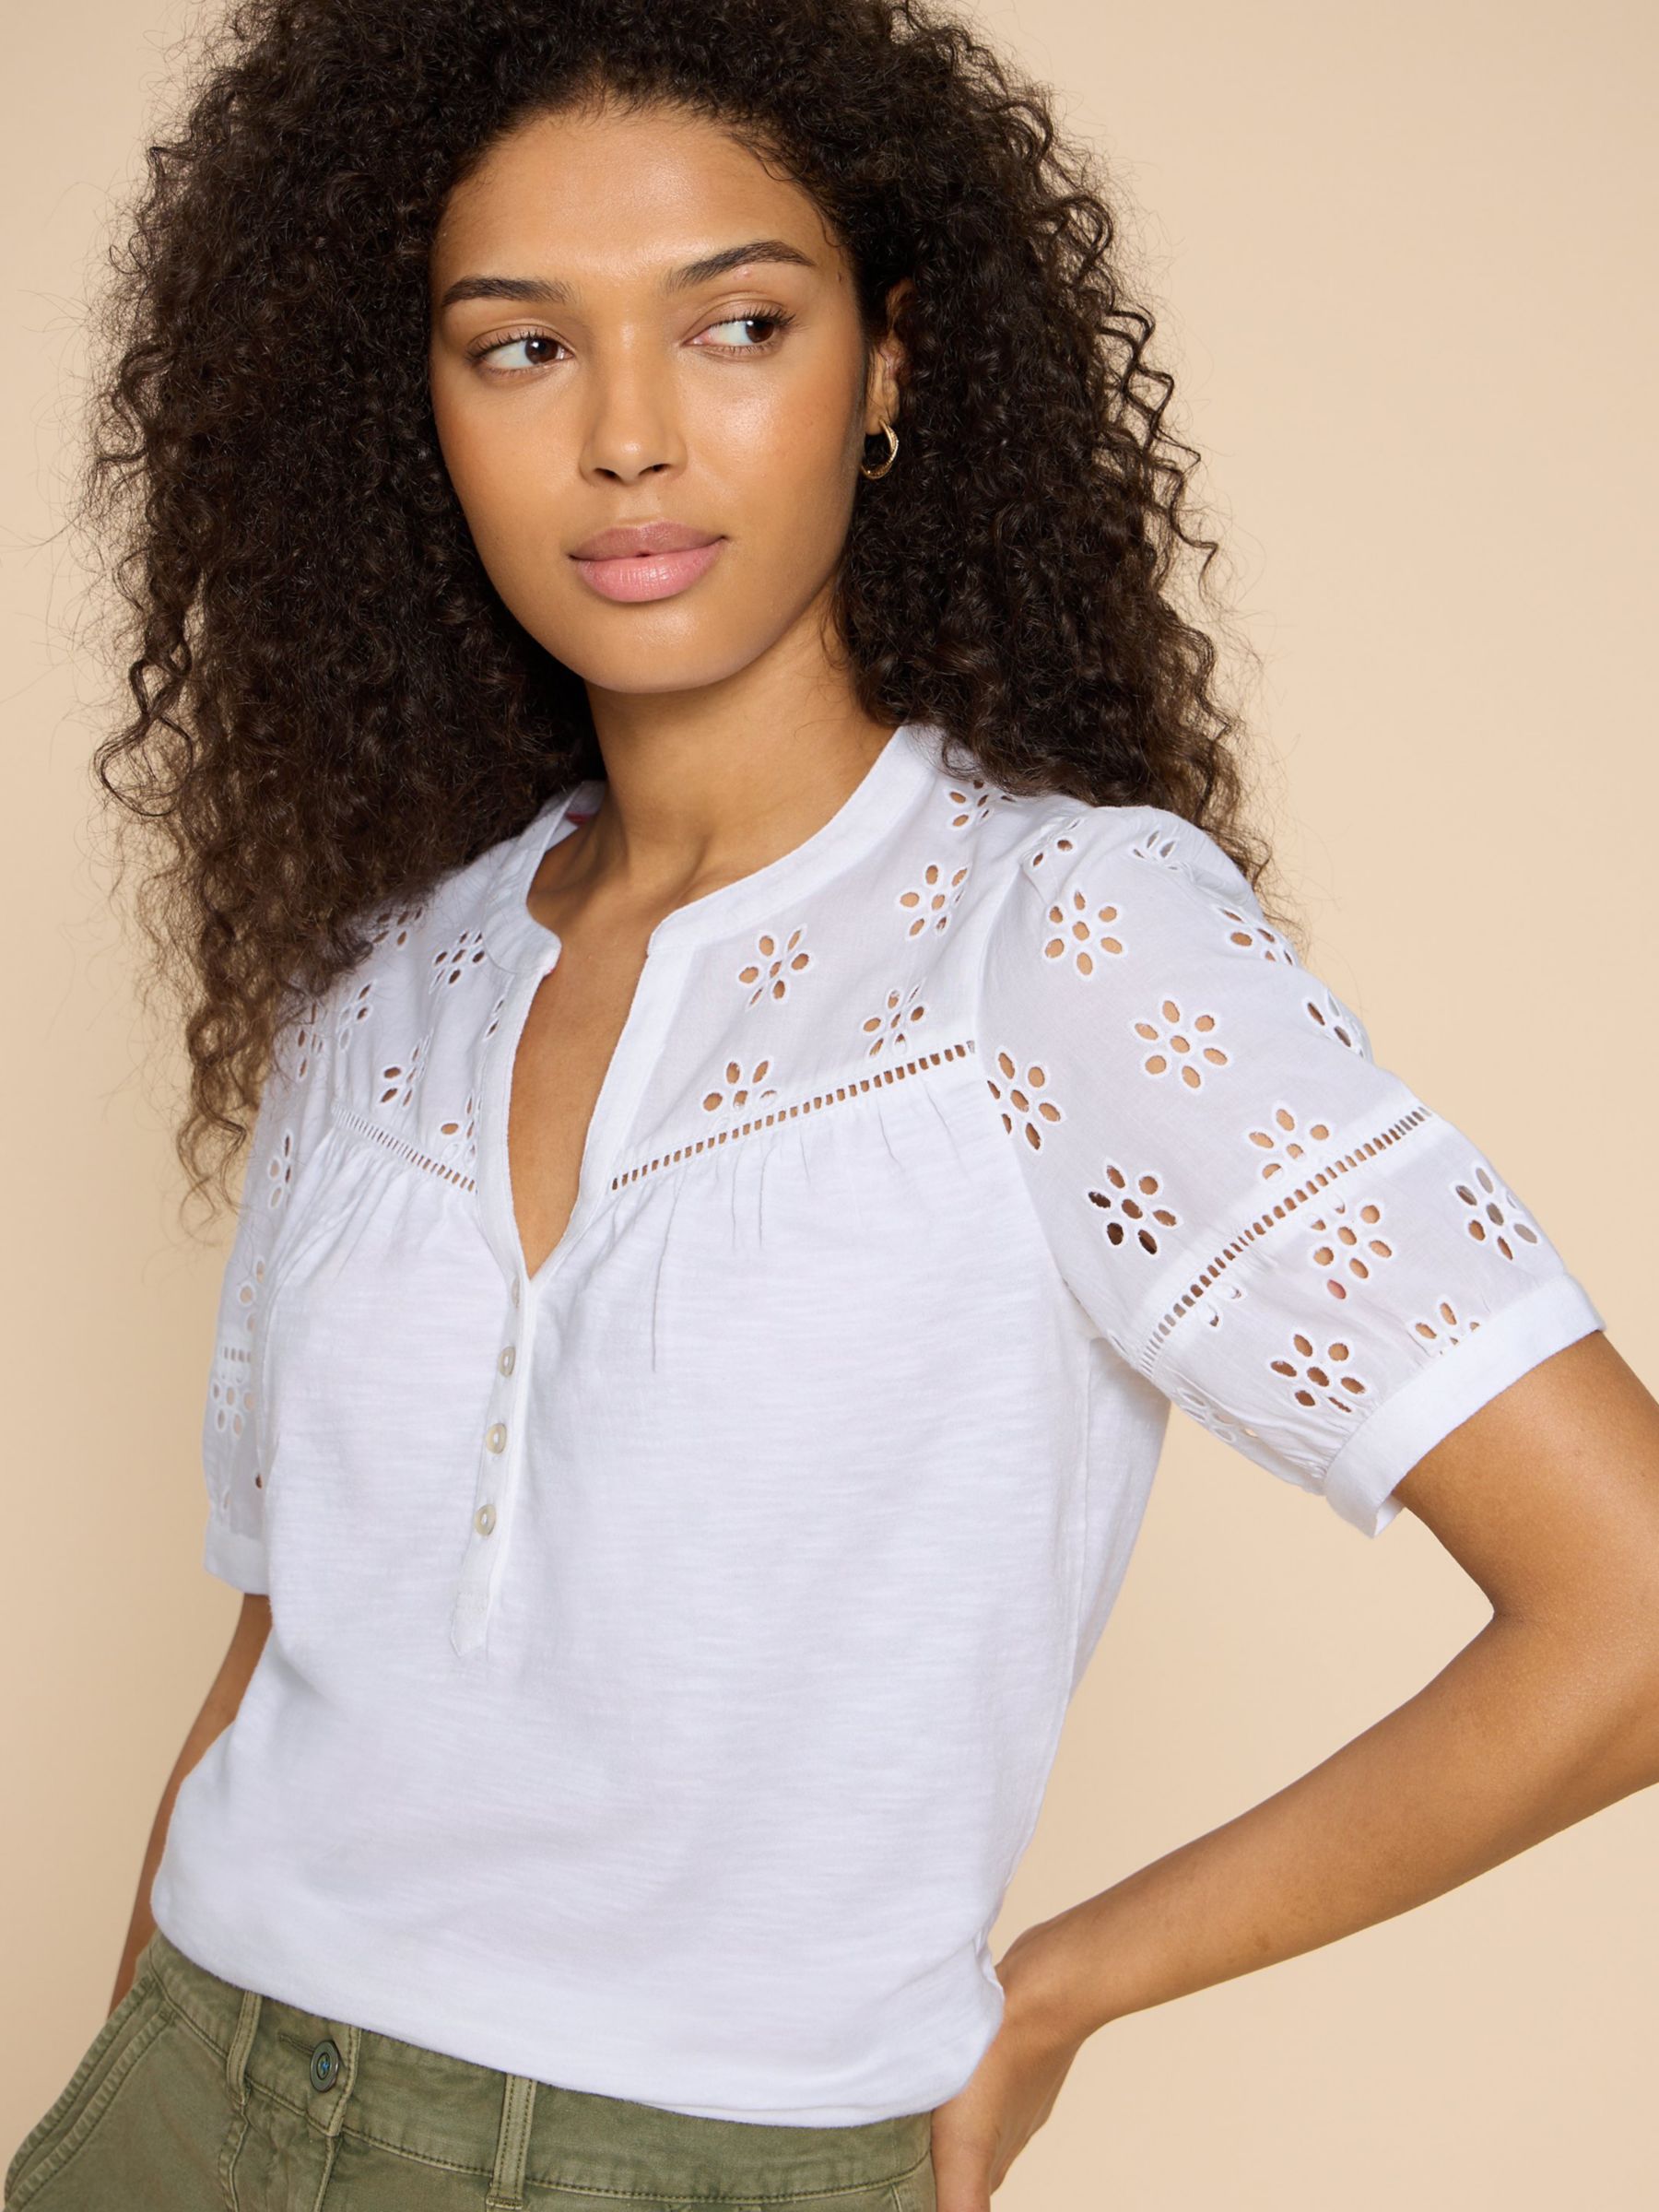 Women's Embroidered Shirts & Tops